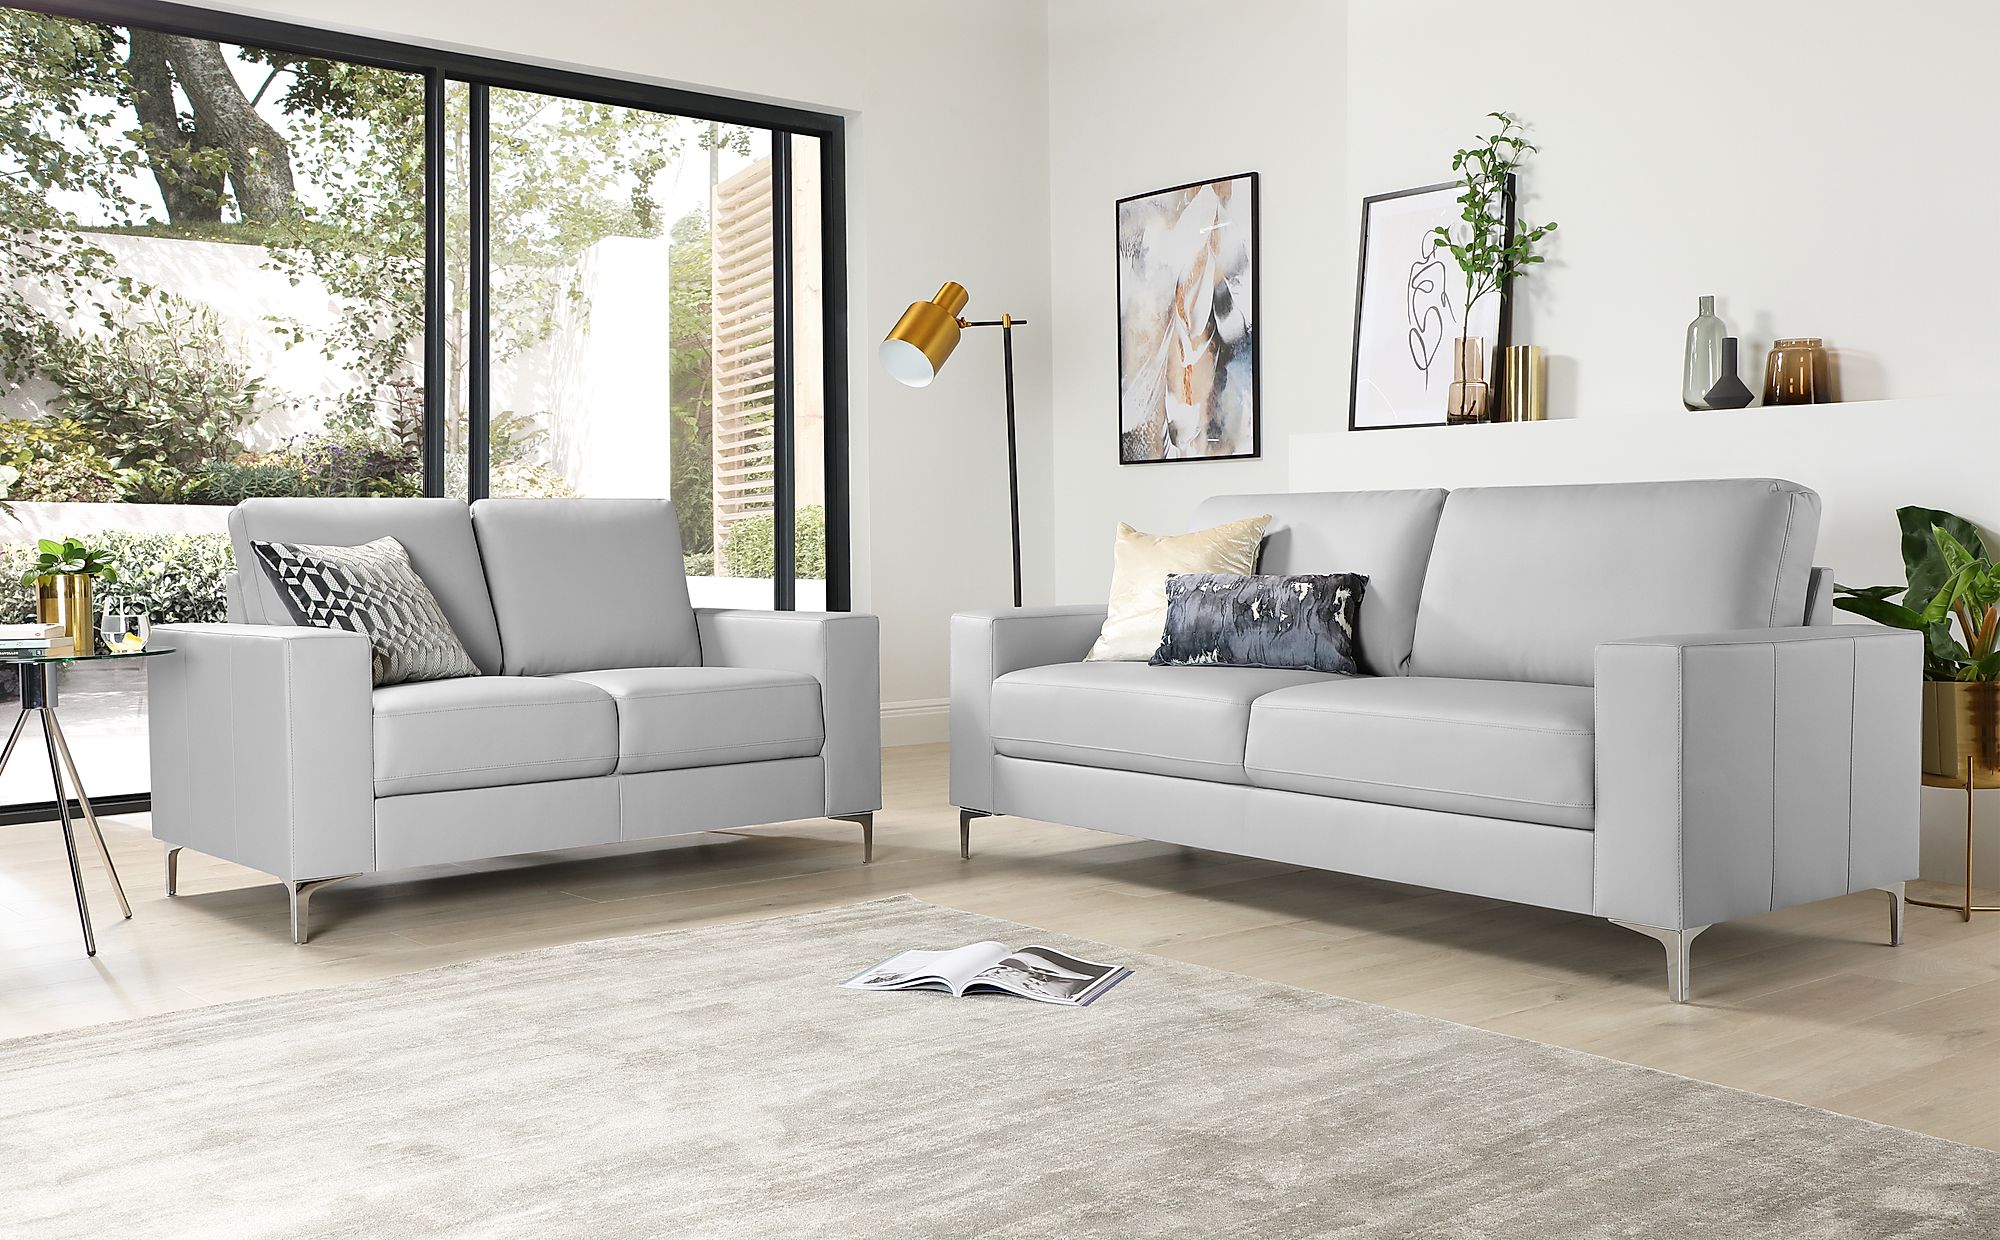 light grey leather sofa and loveseat